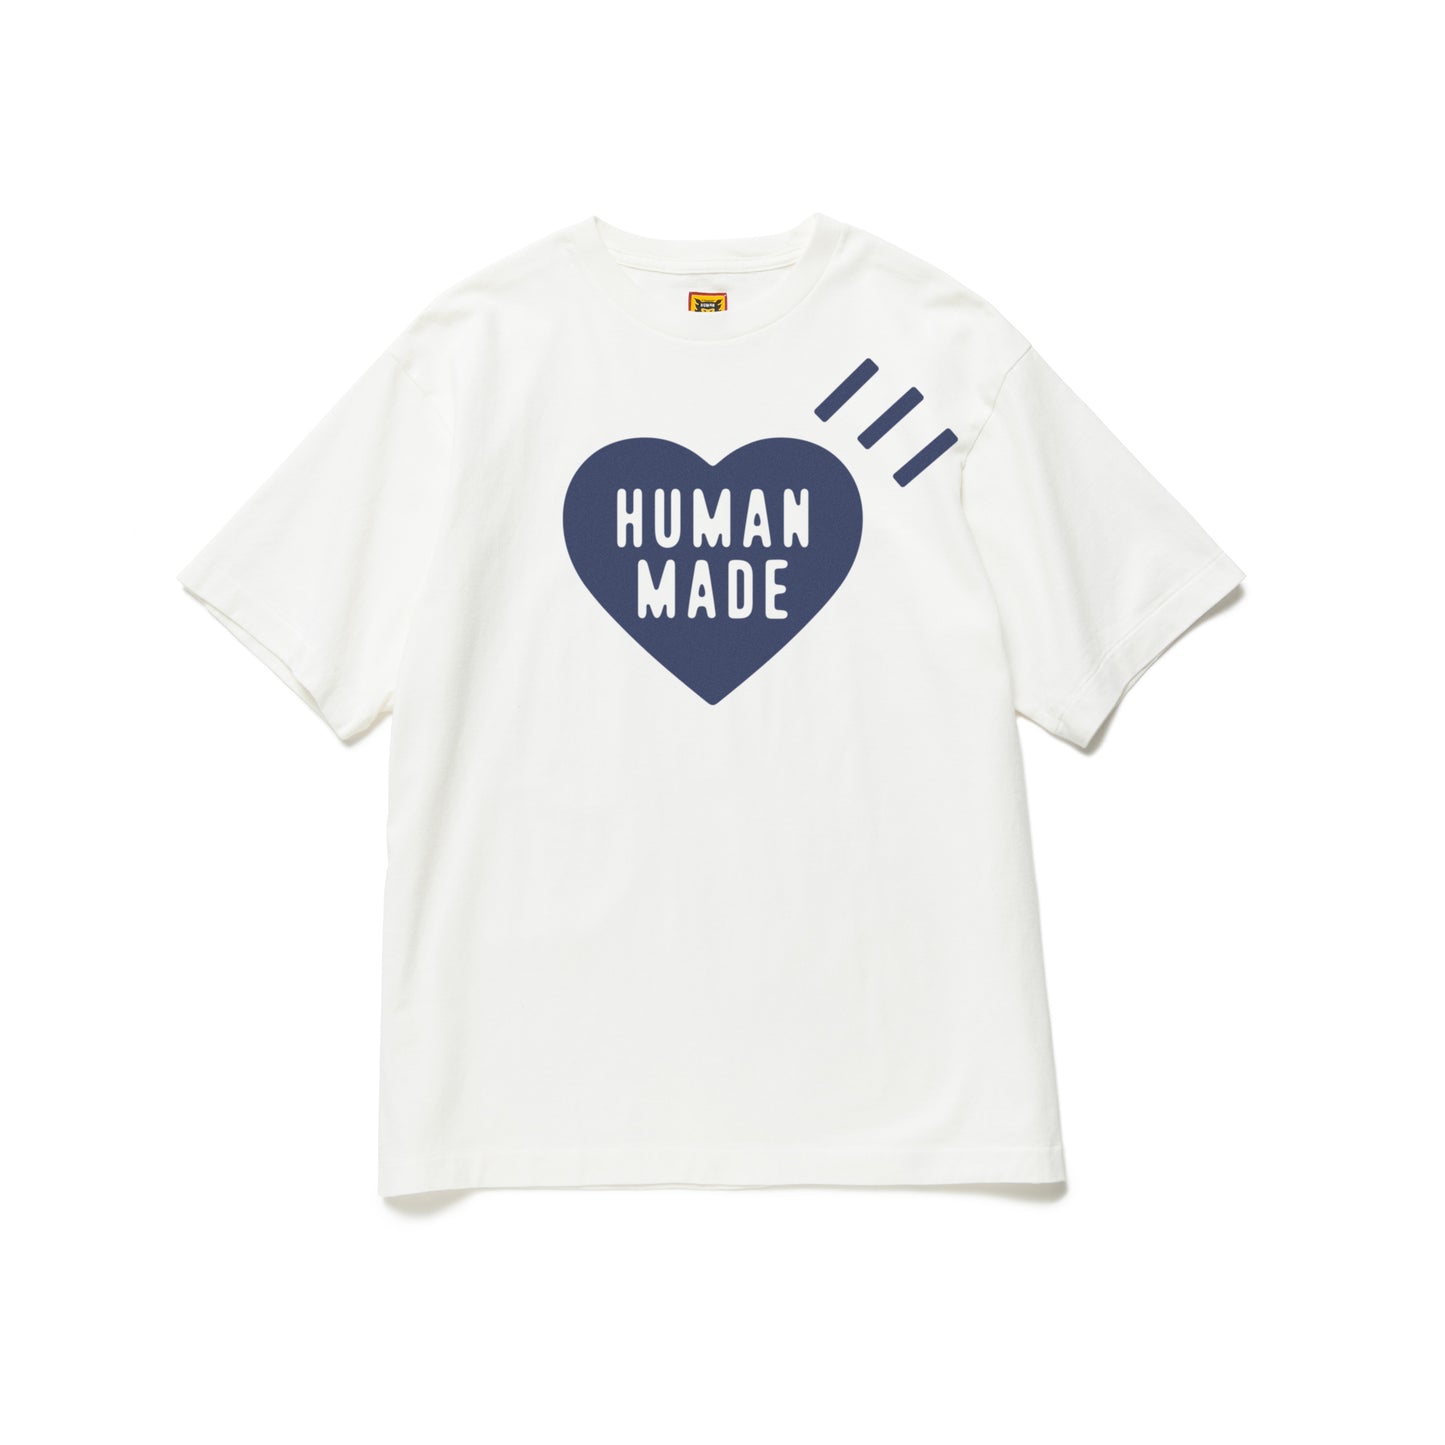 DAILY S/S T-SHIRT #261018 – HUMAN MADE ONLINE STORE